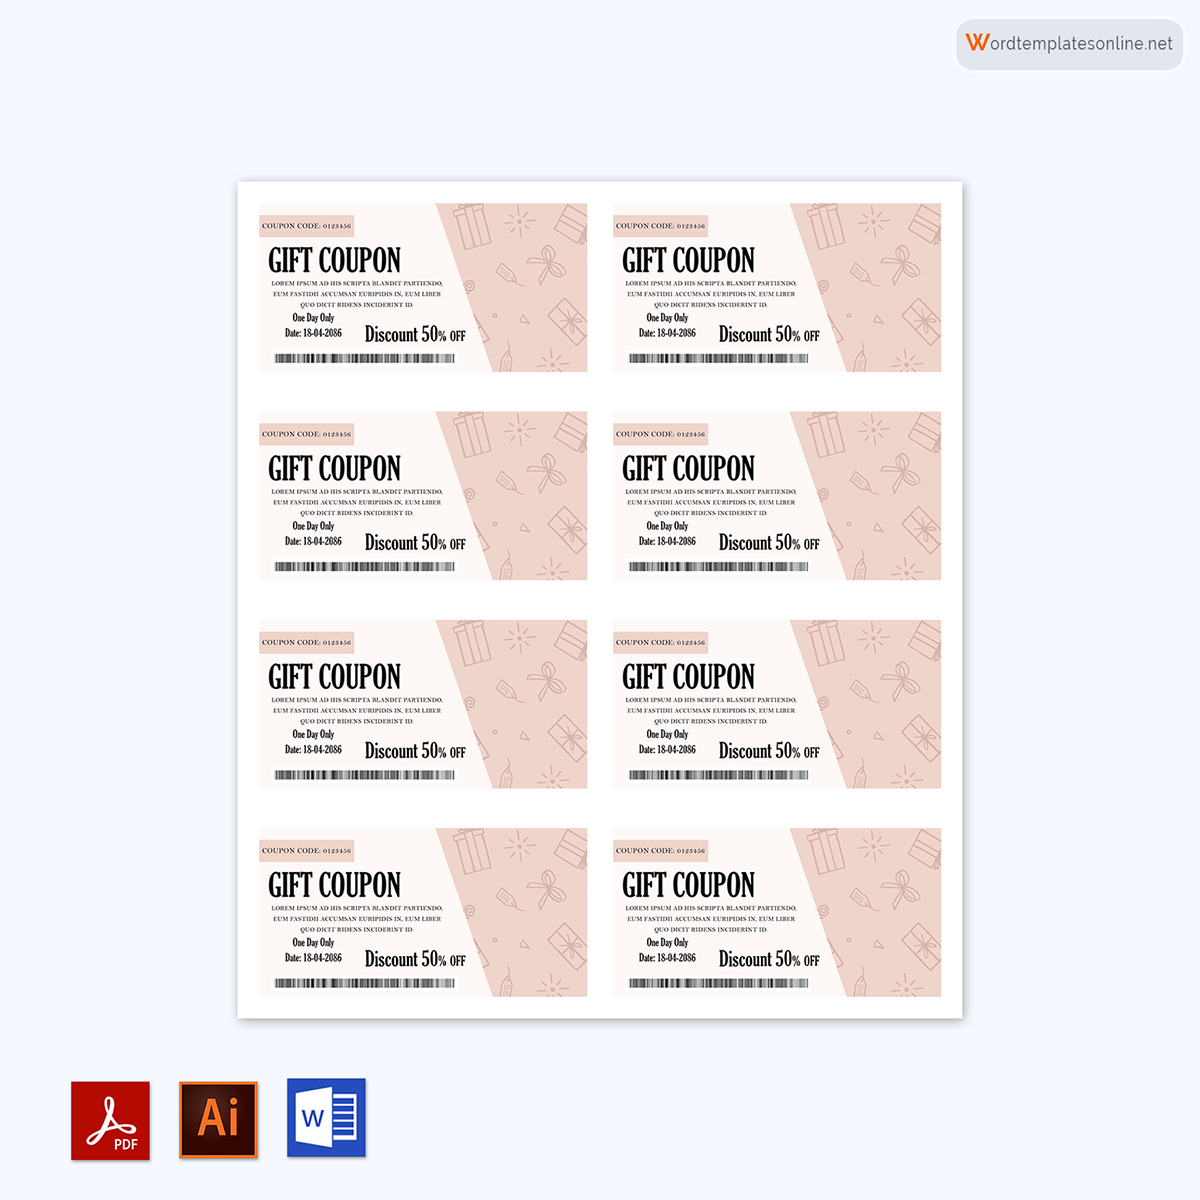 Downloadable gift coupon template PDF